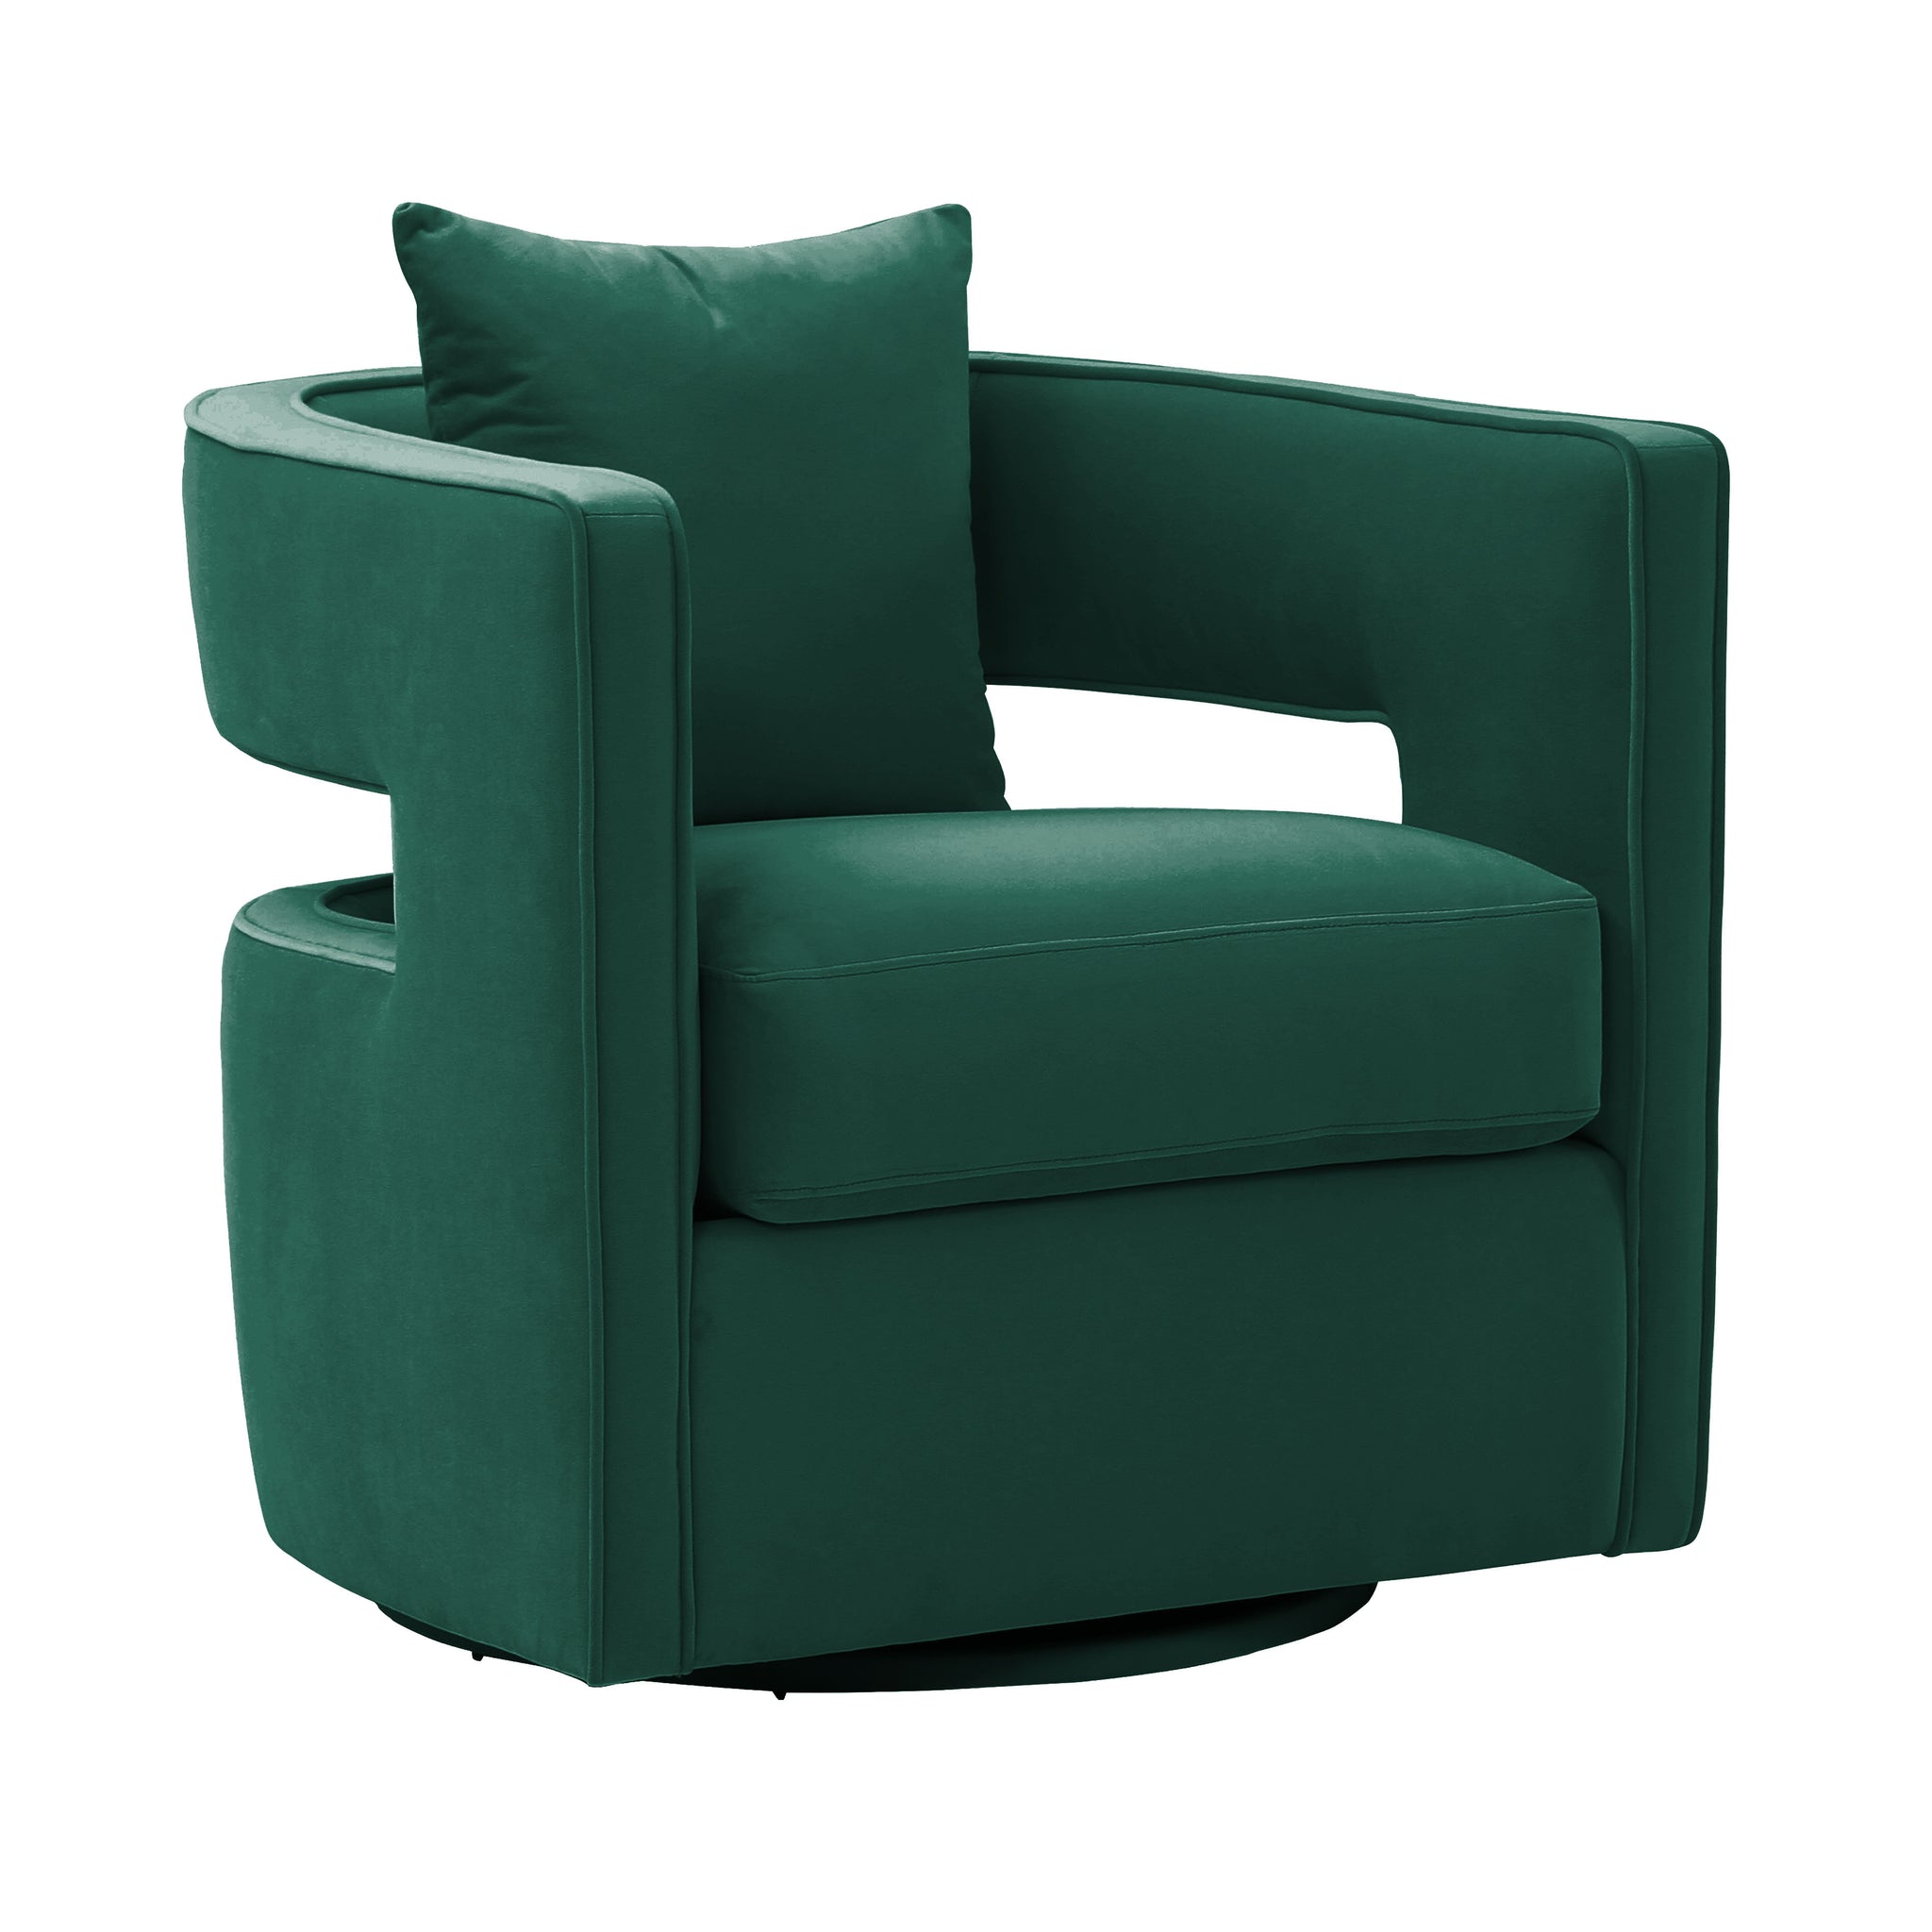 The Madison - Emerald Green Sitting Chair